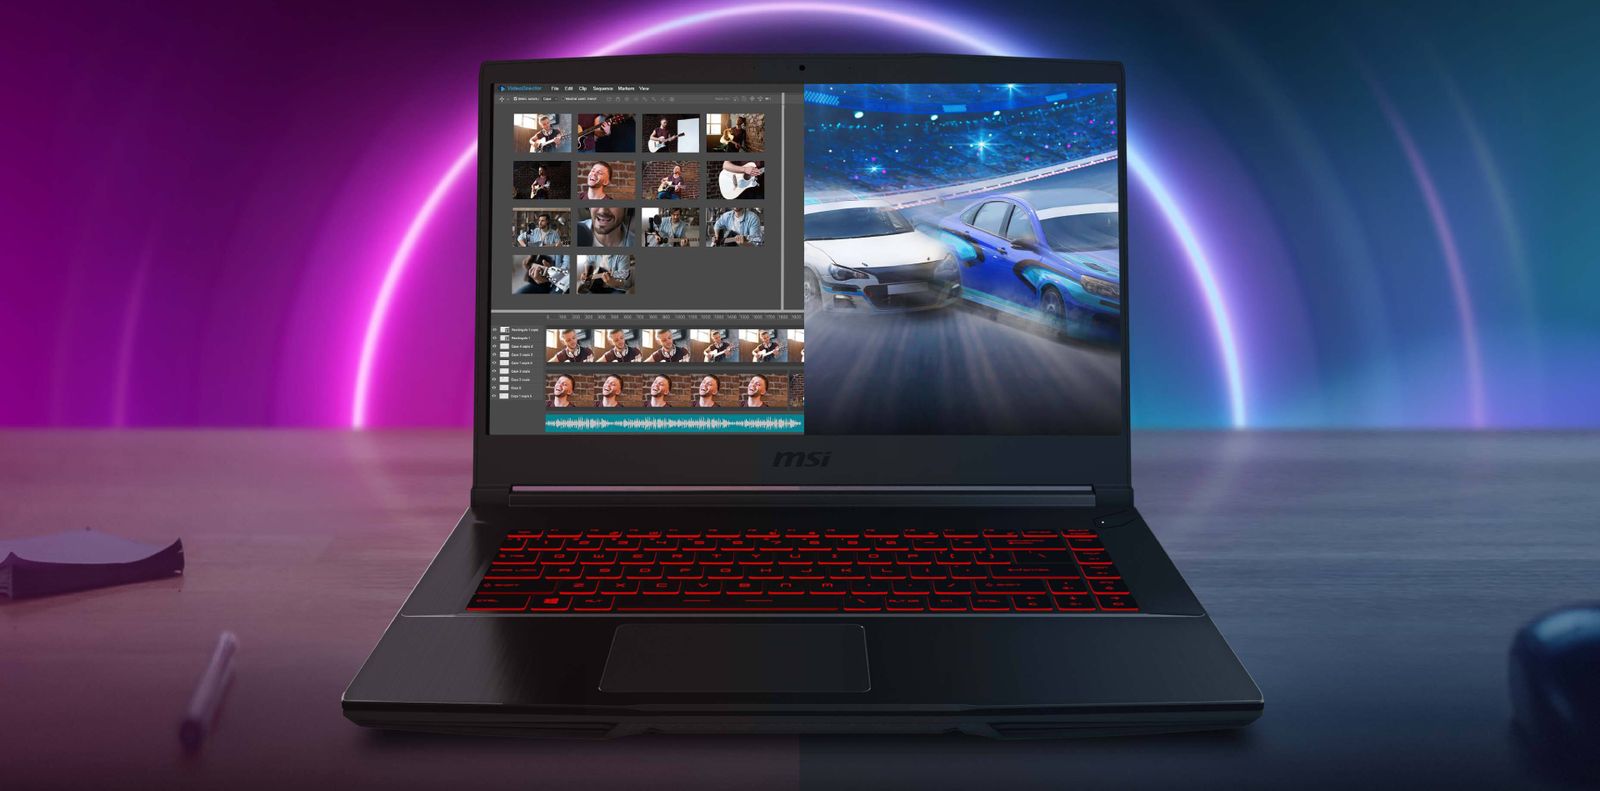 Image of a black laptop with red backlit keys and photos being edited along with racing gameplay on the displaysat on a desk.